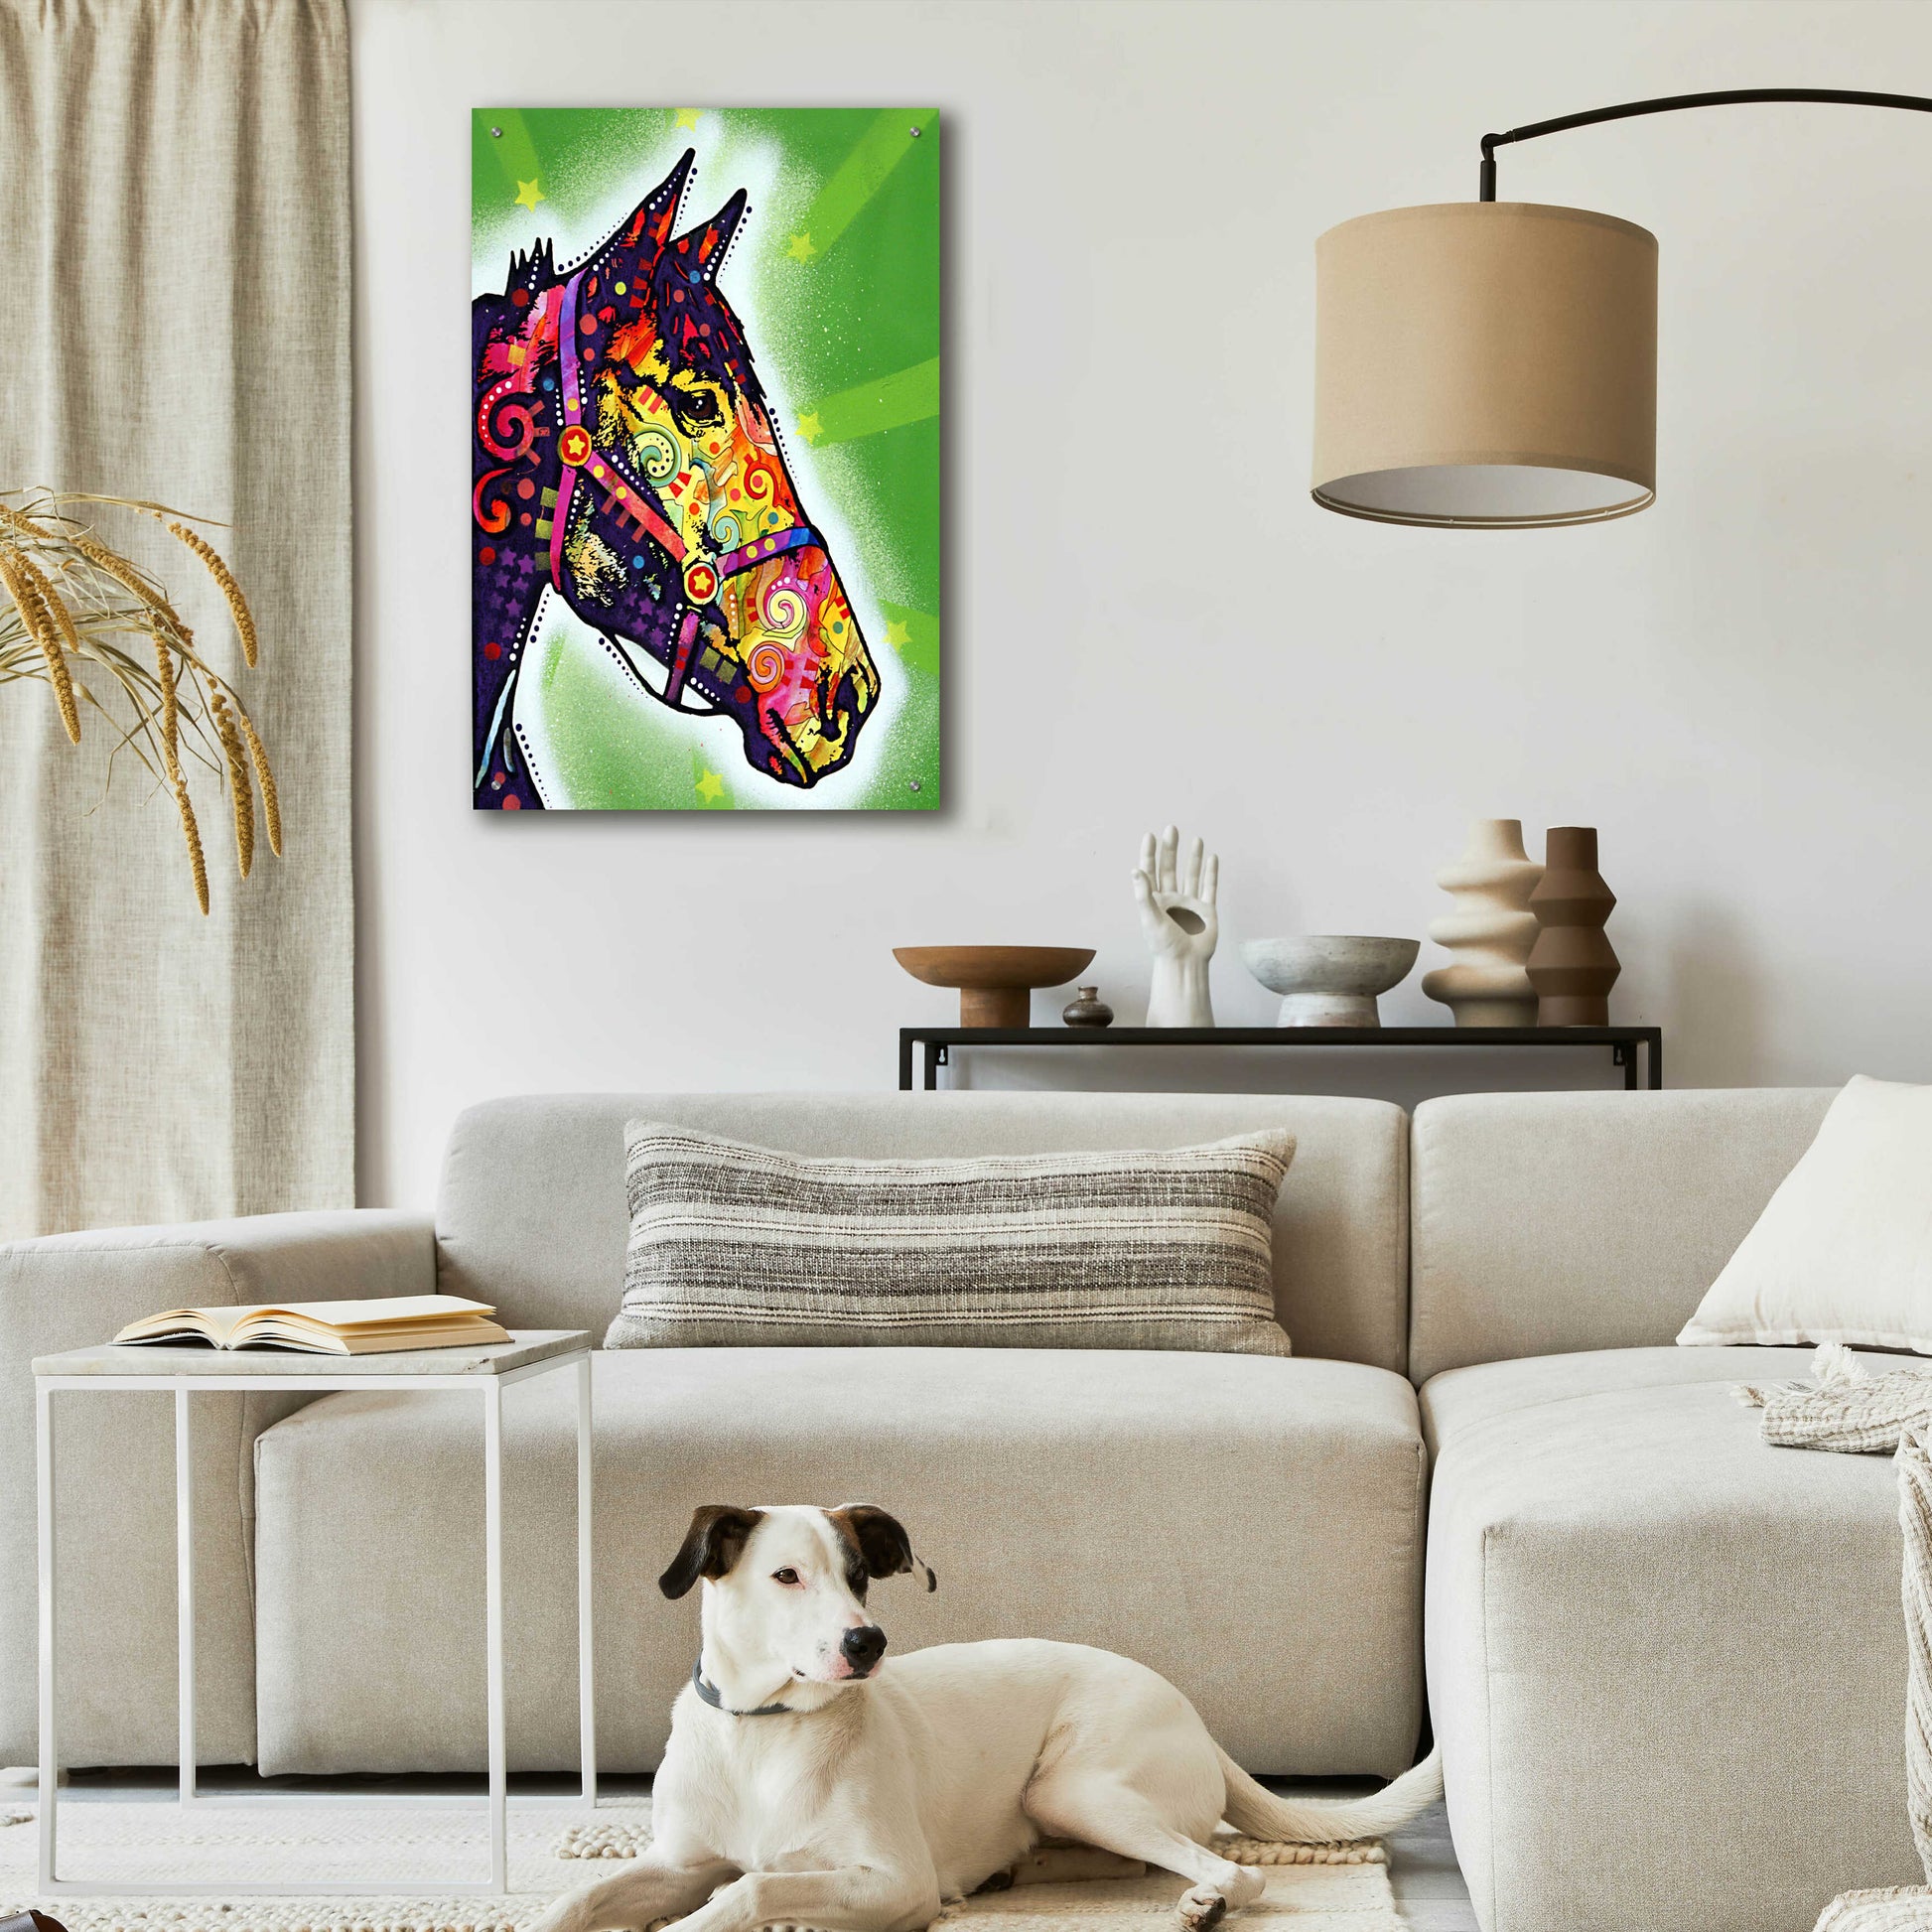 Epic Art 'Horse 2' by Dean Russo, Acrylic Glass Wall Art,24x36